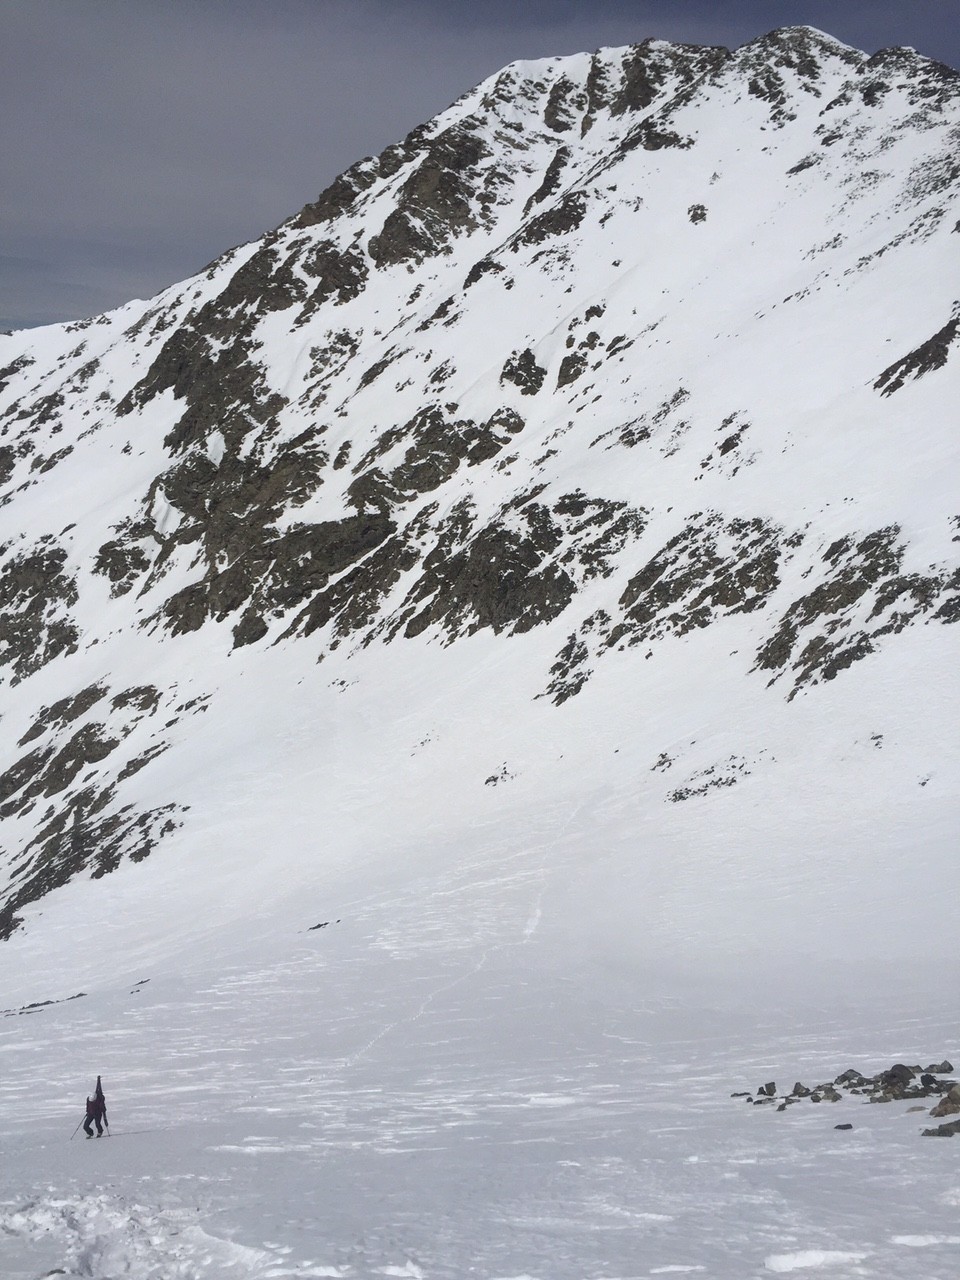 Heading up Blanca, looking back across to the line I skied on Ellingwood's south face.